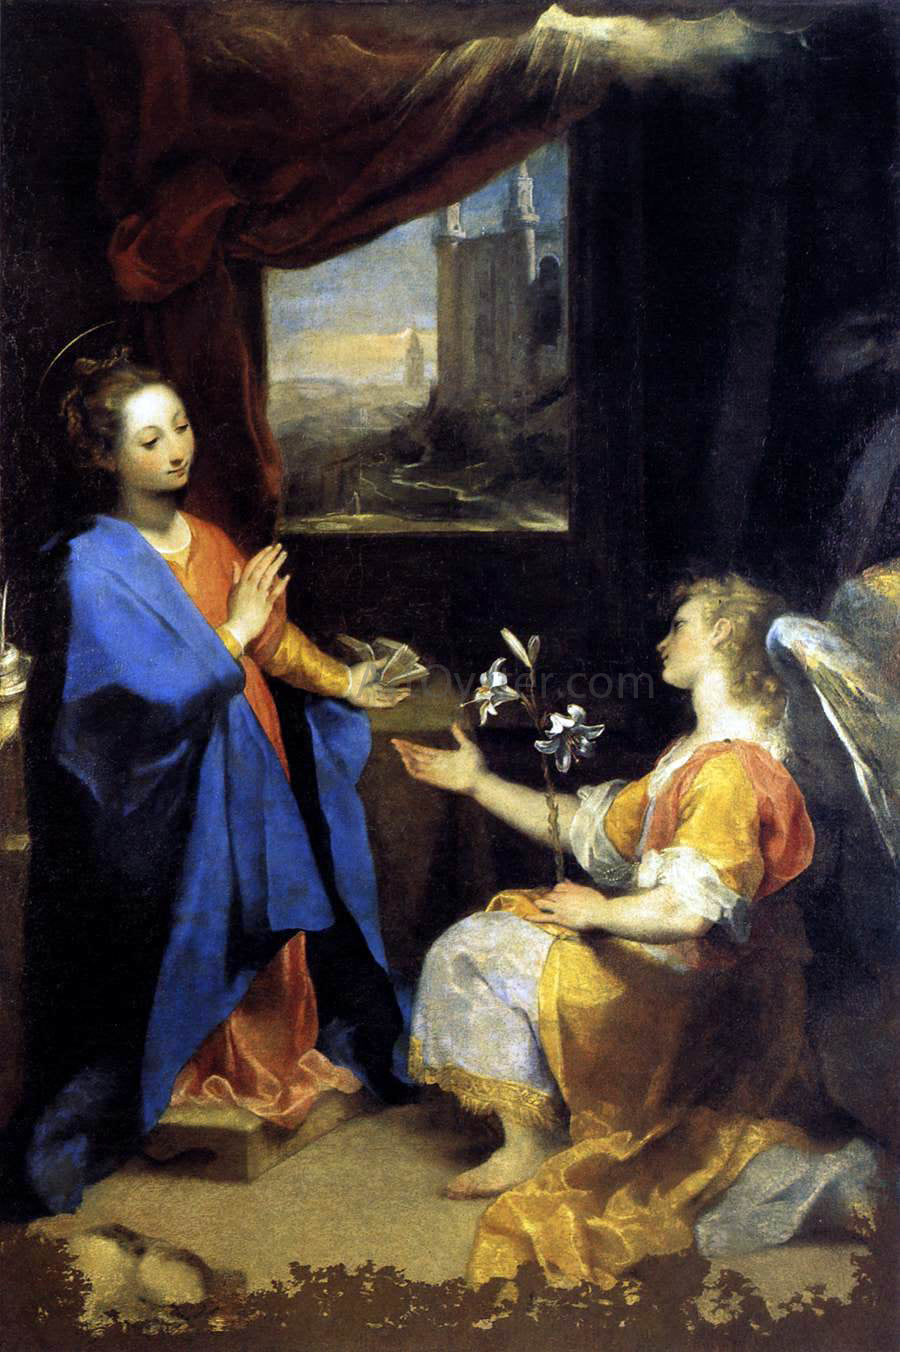  Federico Fiori Barocci Annunciation - Hand Painted Oil Painting